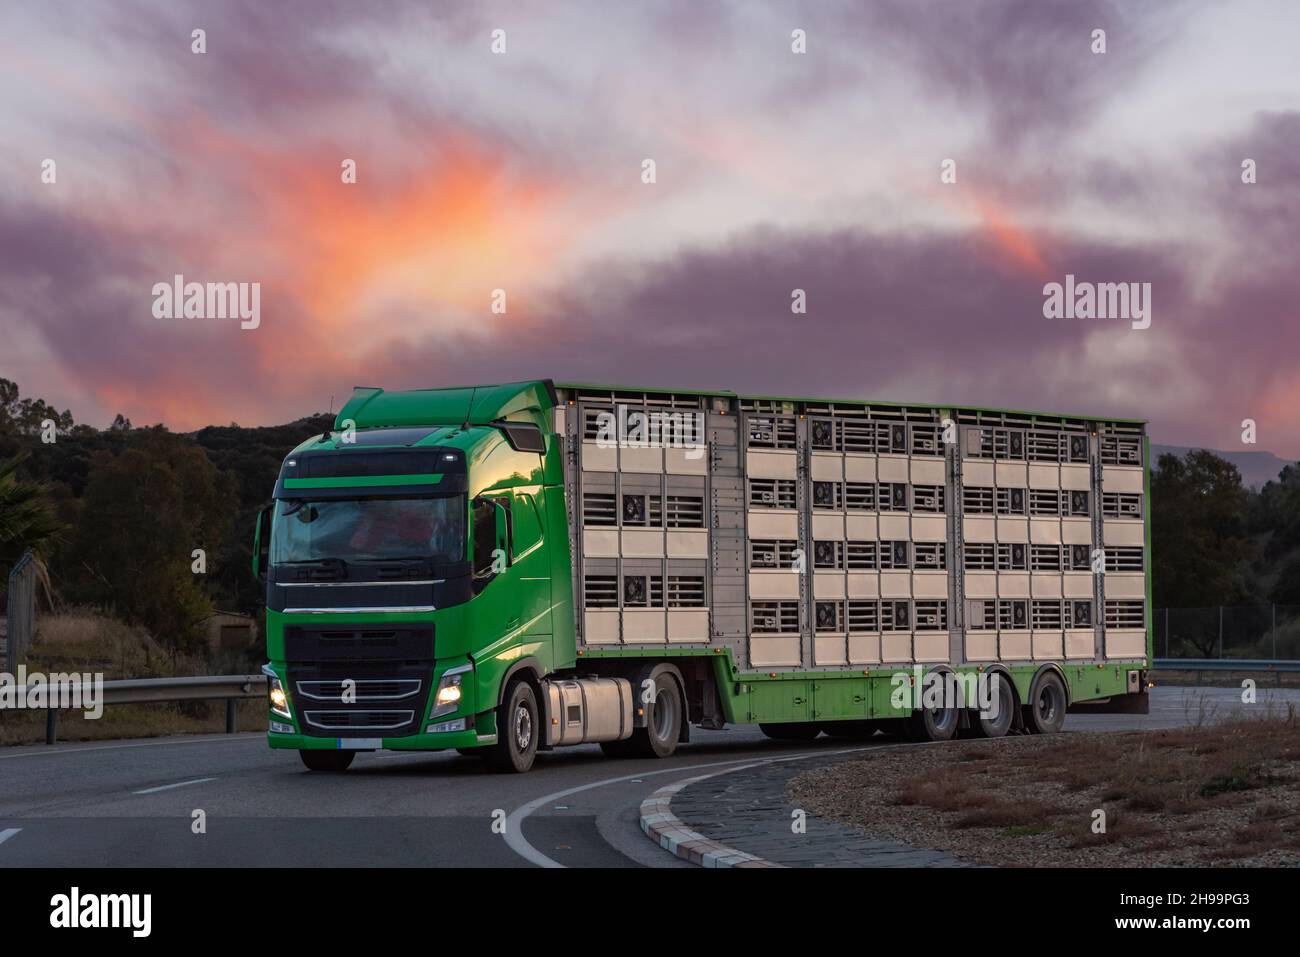 Truck with cage semi-trailer for transporting livestock. Stock Photo